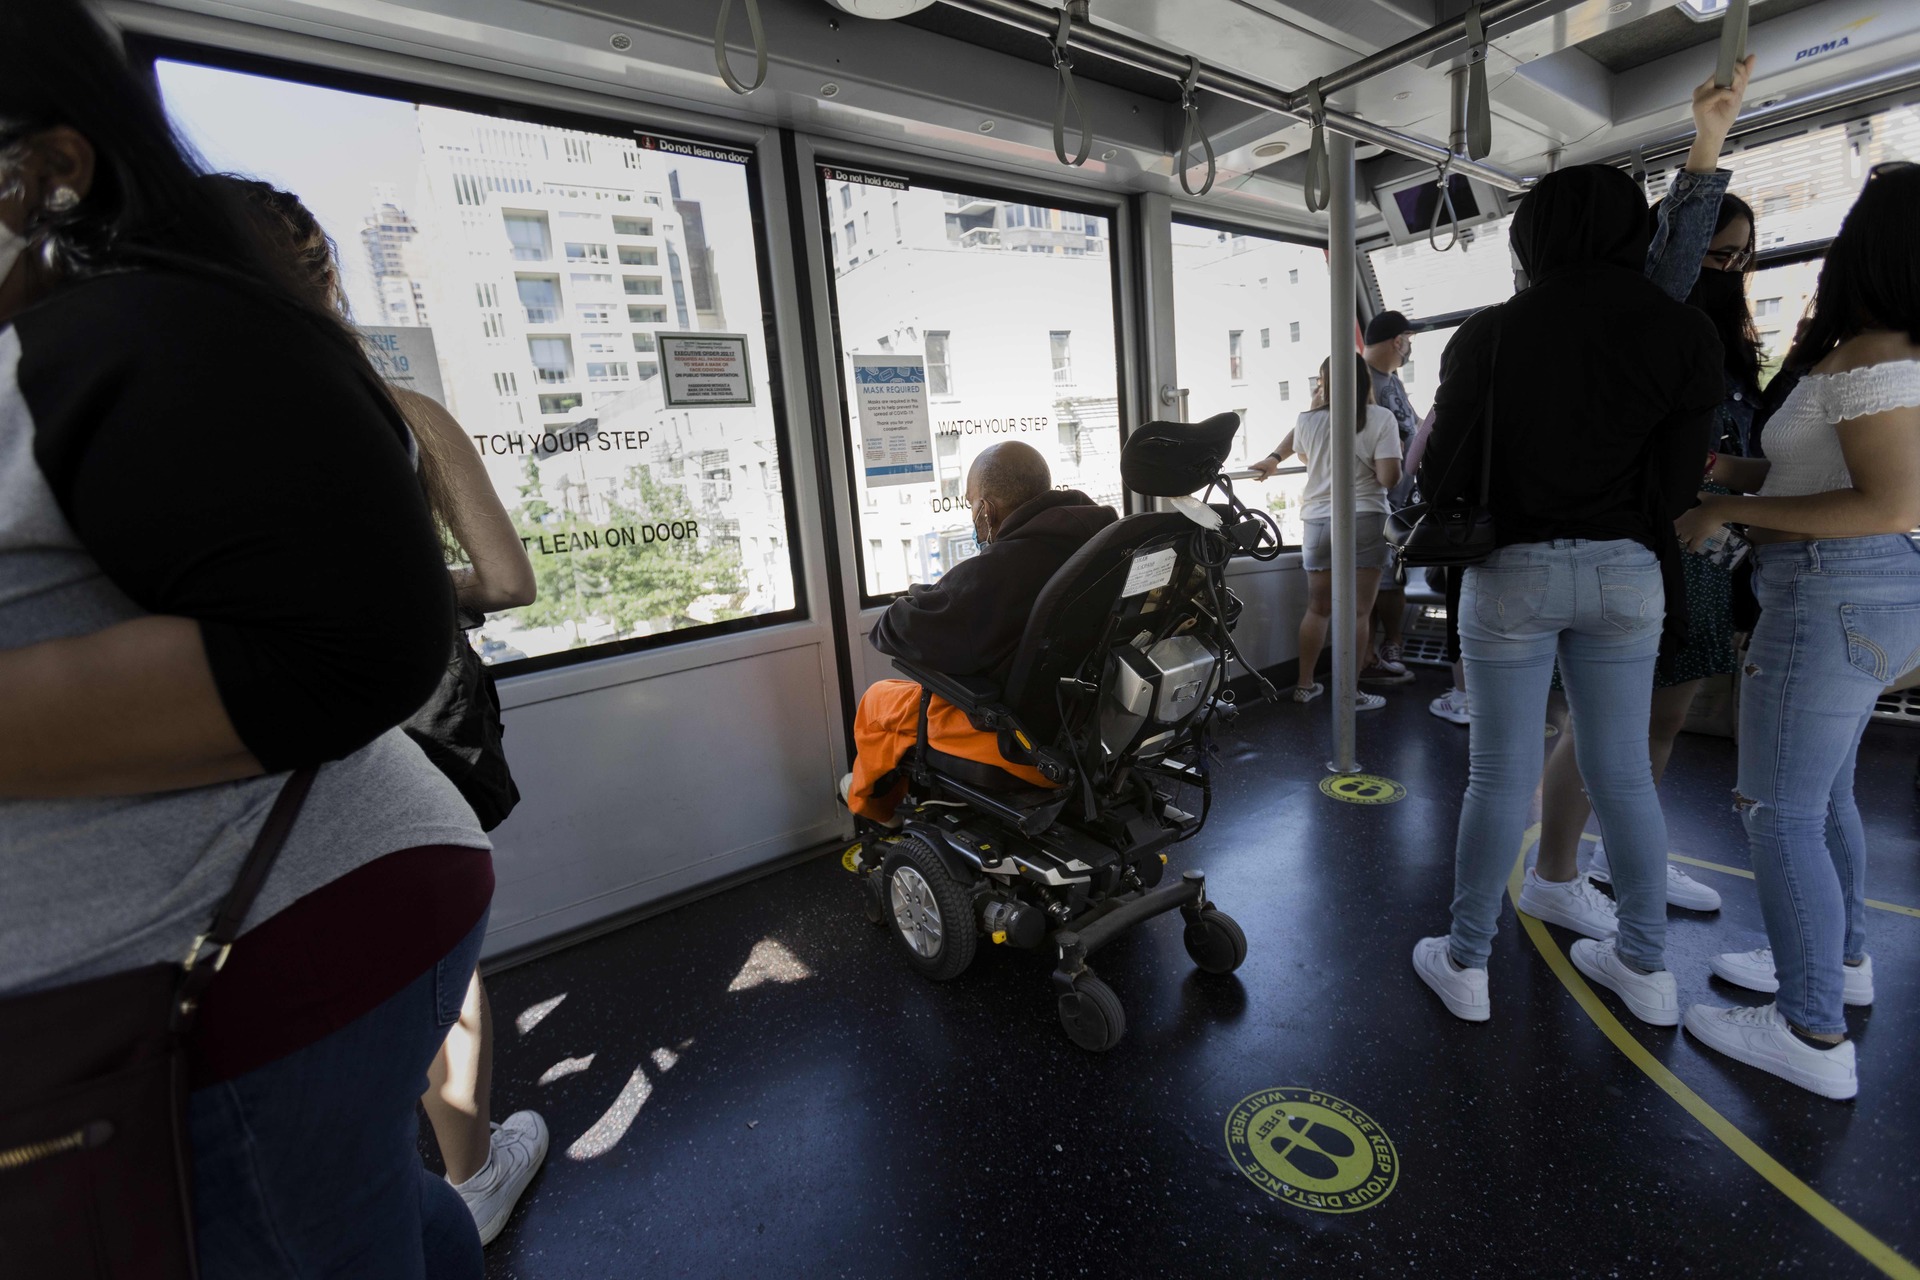 A man in a power wheelchair looks out the window, on the Roosevelt Island Tramway.